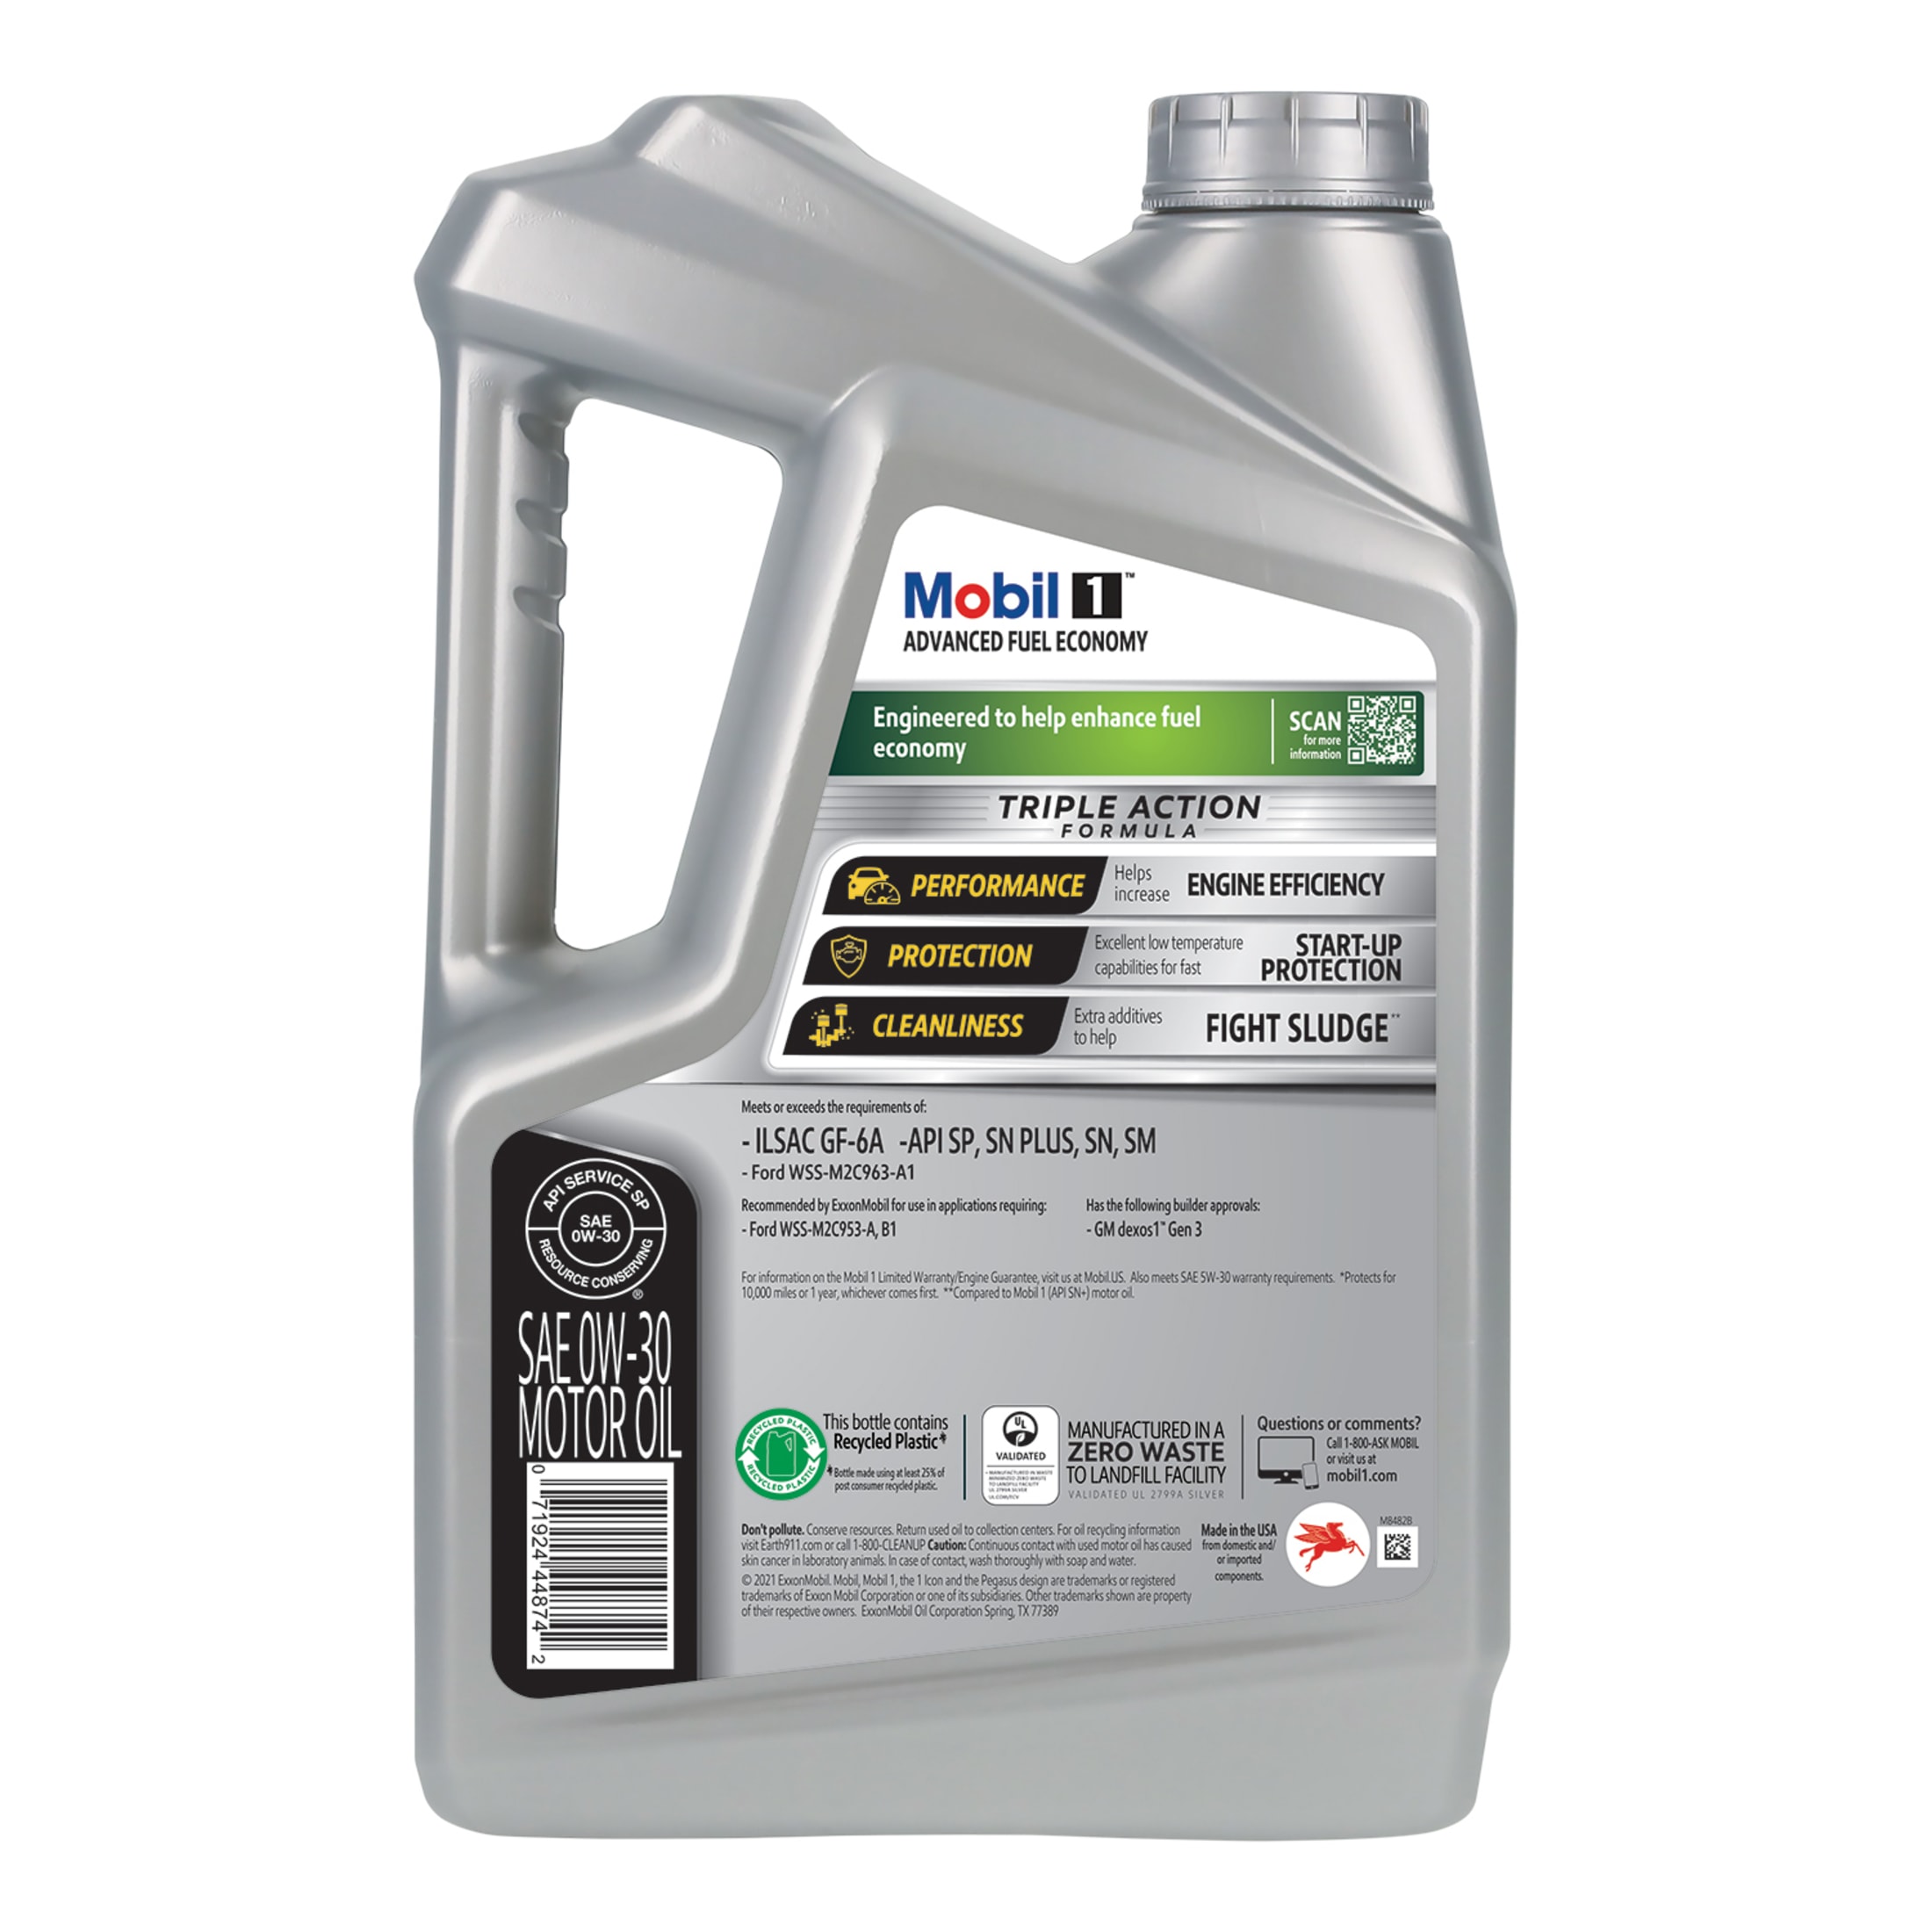 Mobil 1 Advanced Fuel Economy Full Synthetic Motor Oil 0W-30, 5 Quart - image 4 of 9